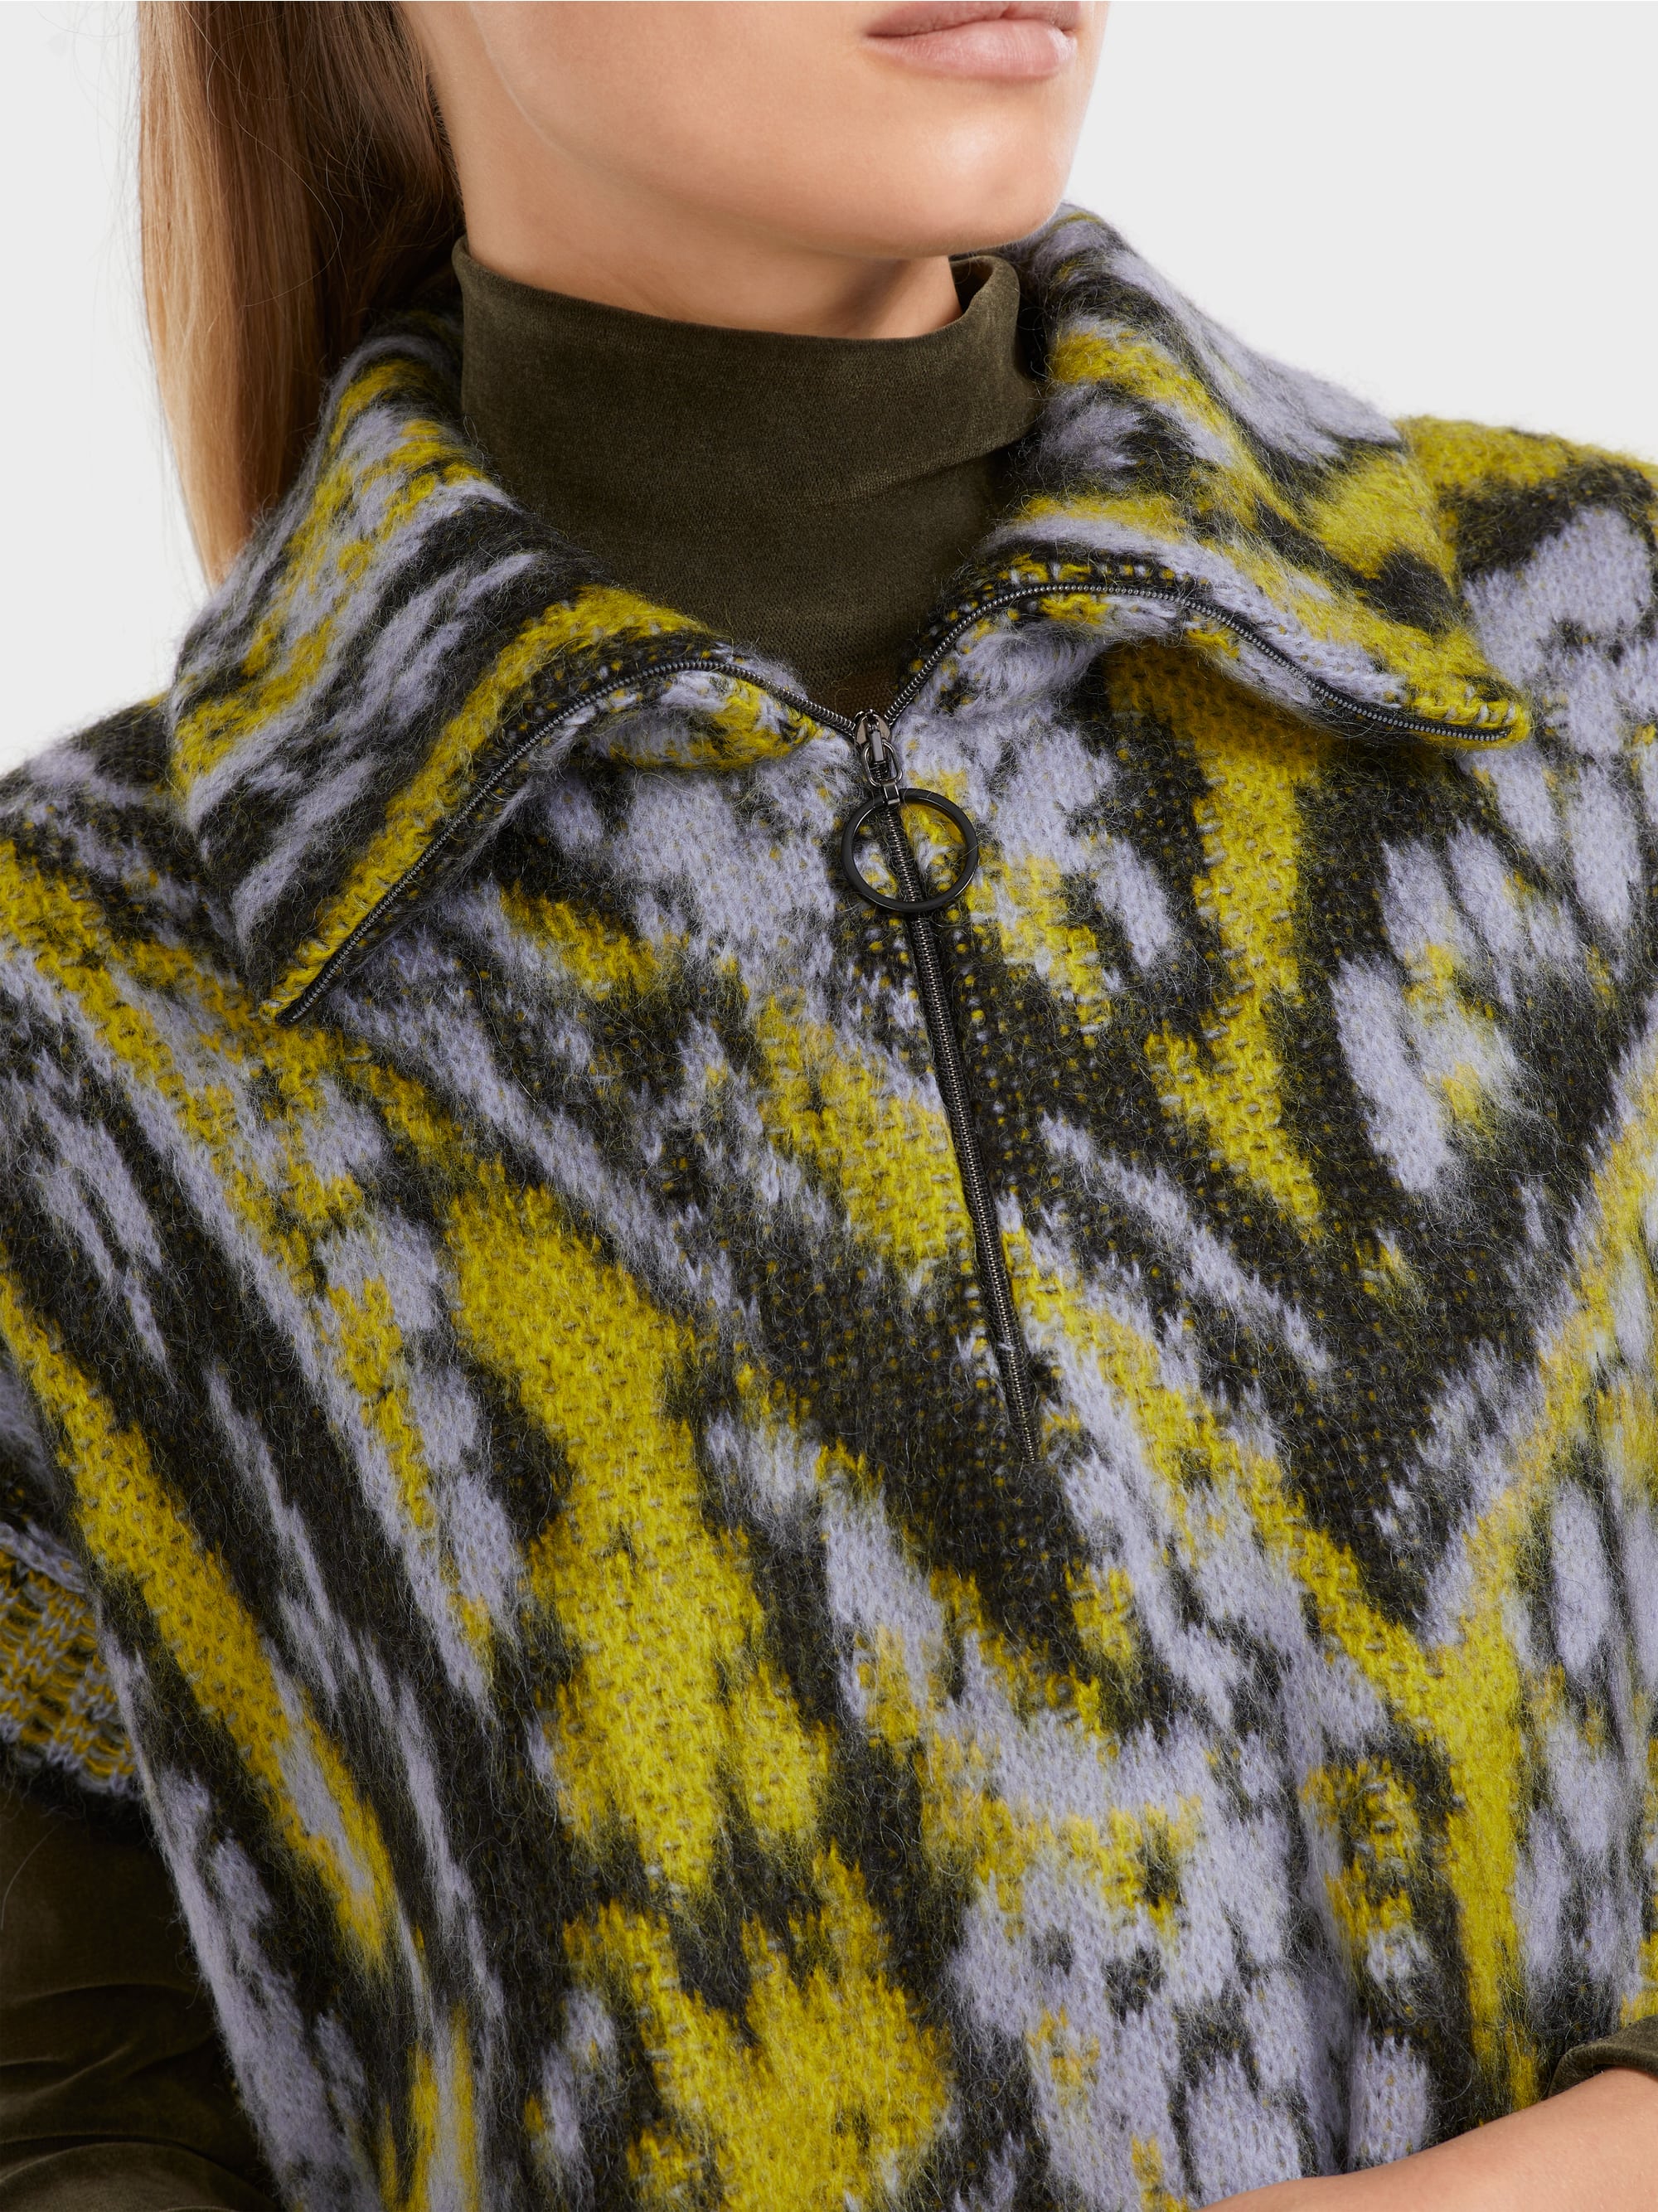 Marc Cain Printed Knitted Vest